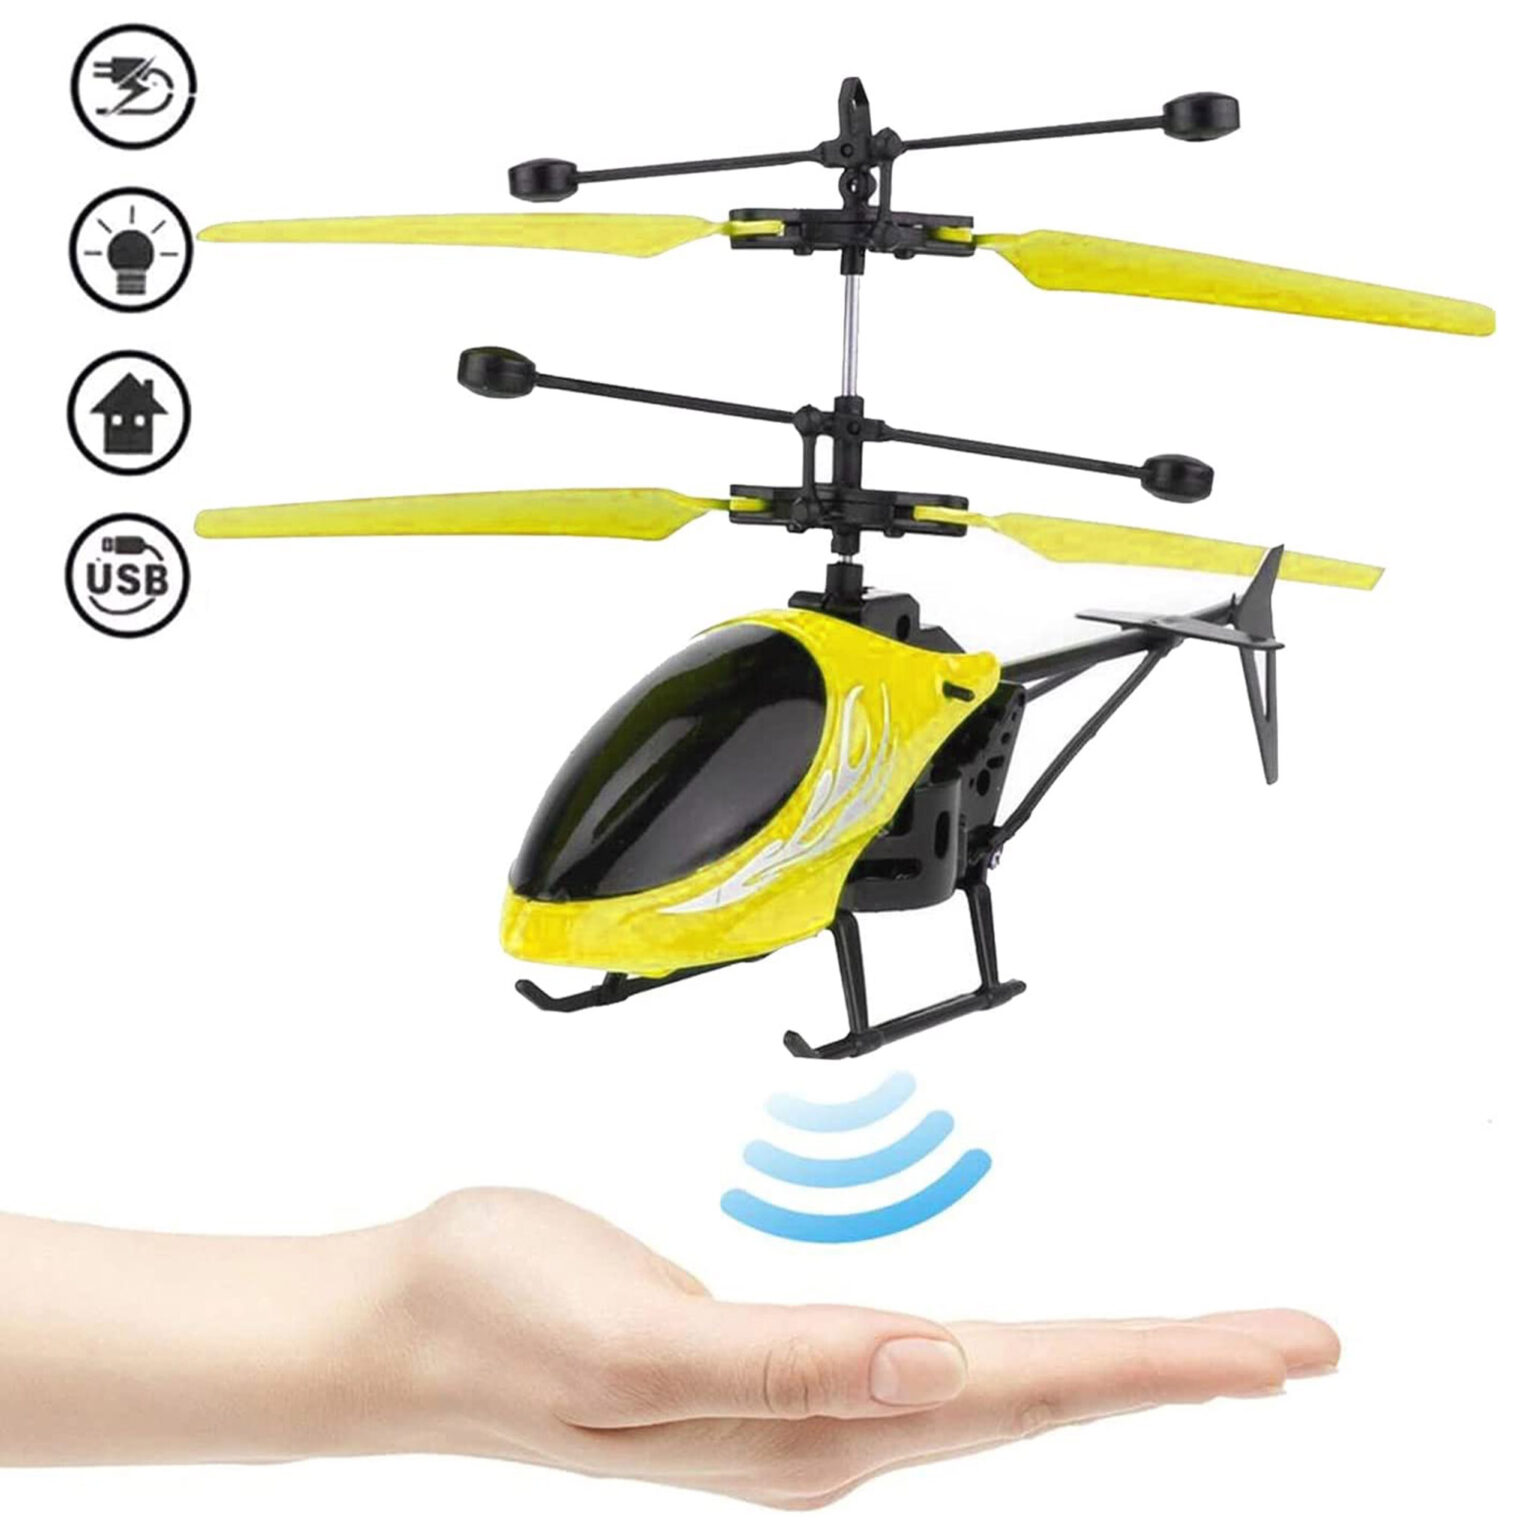 Rechargeable IR Sensor Helicopter Toy - OneClick